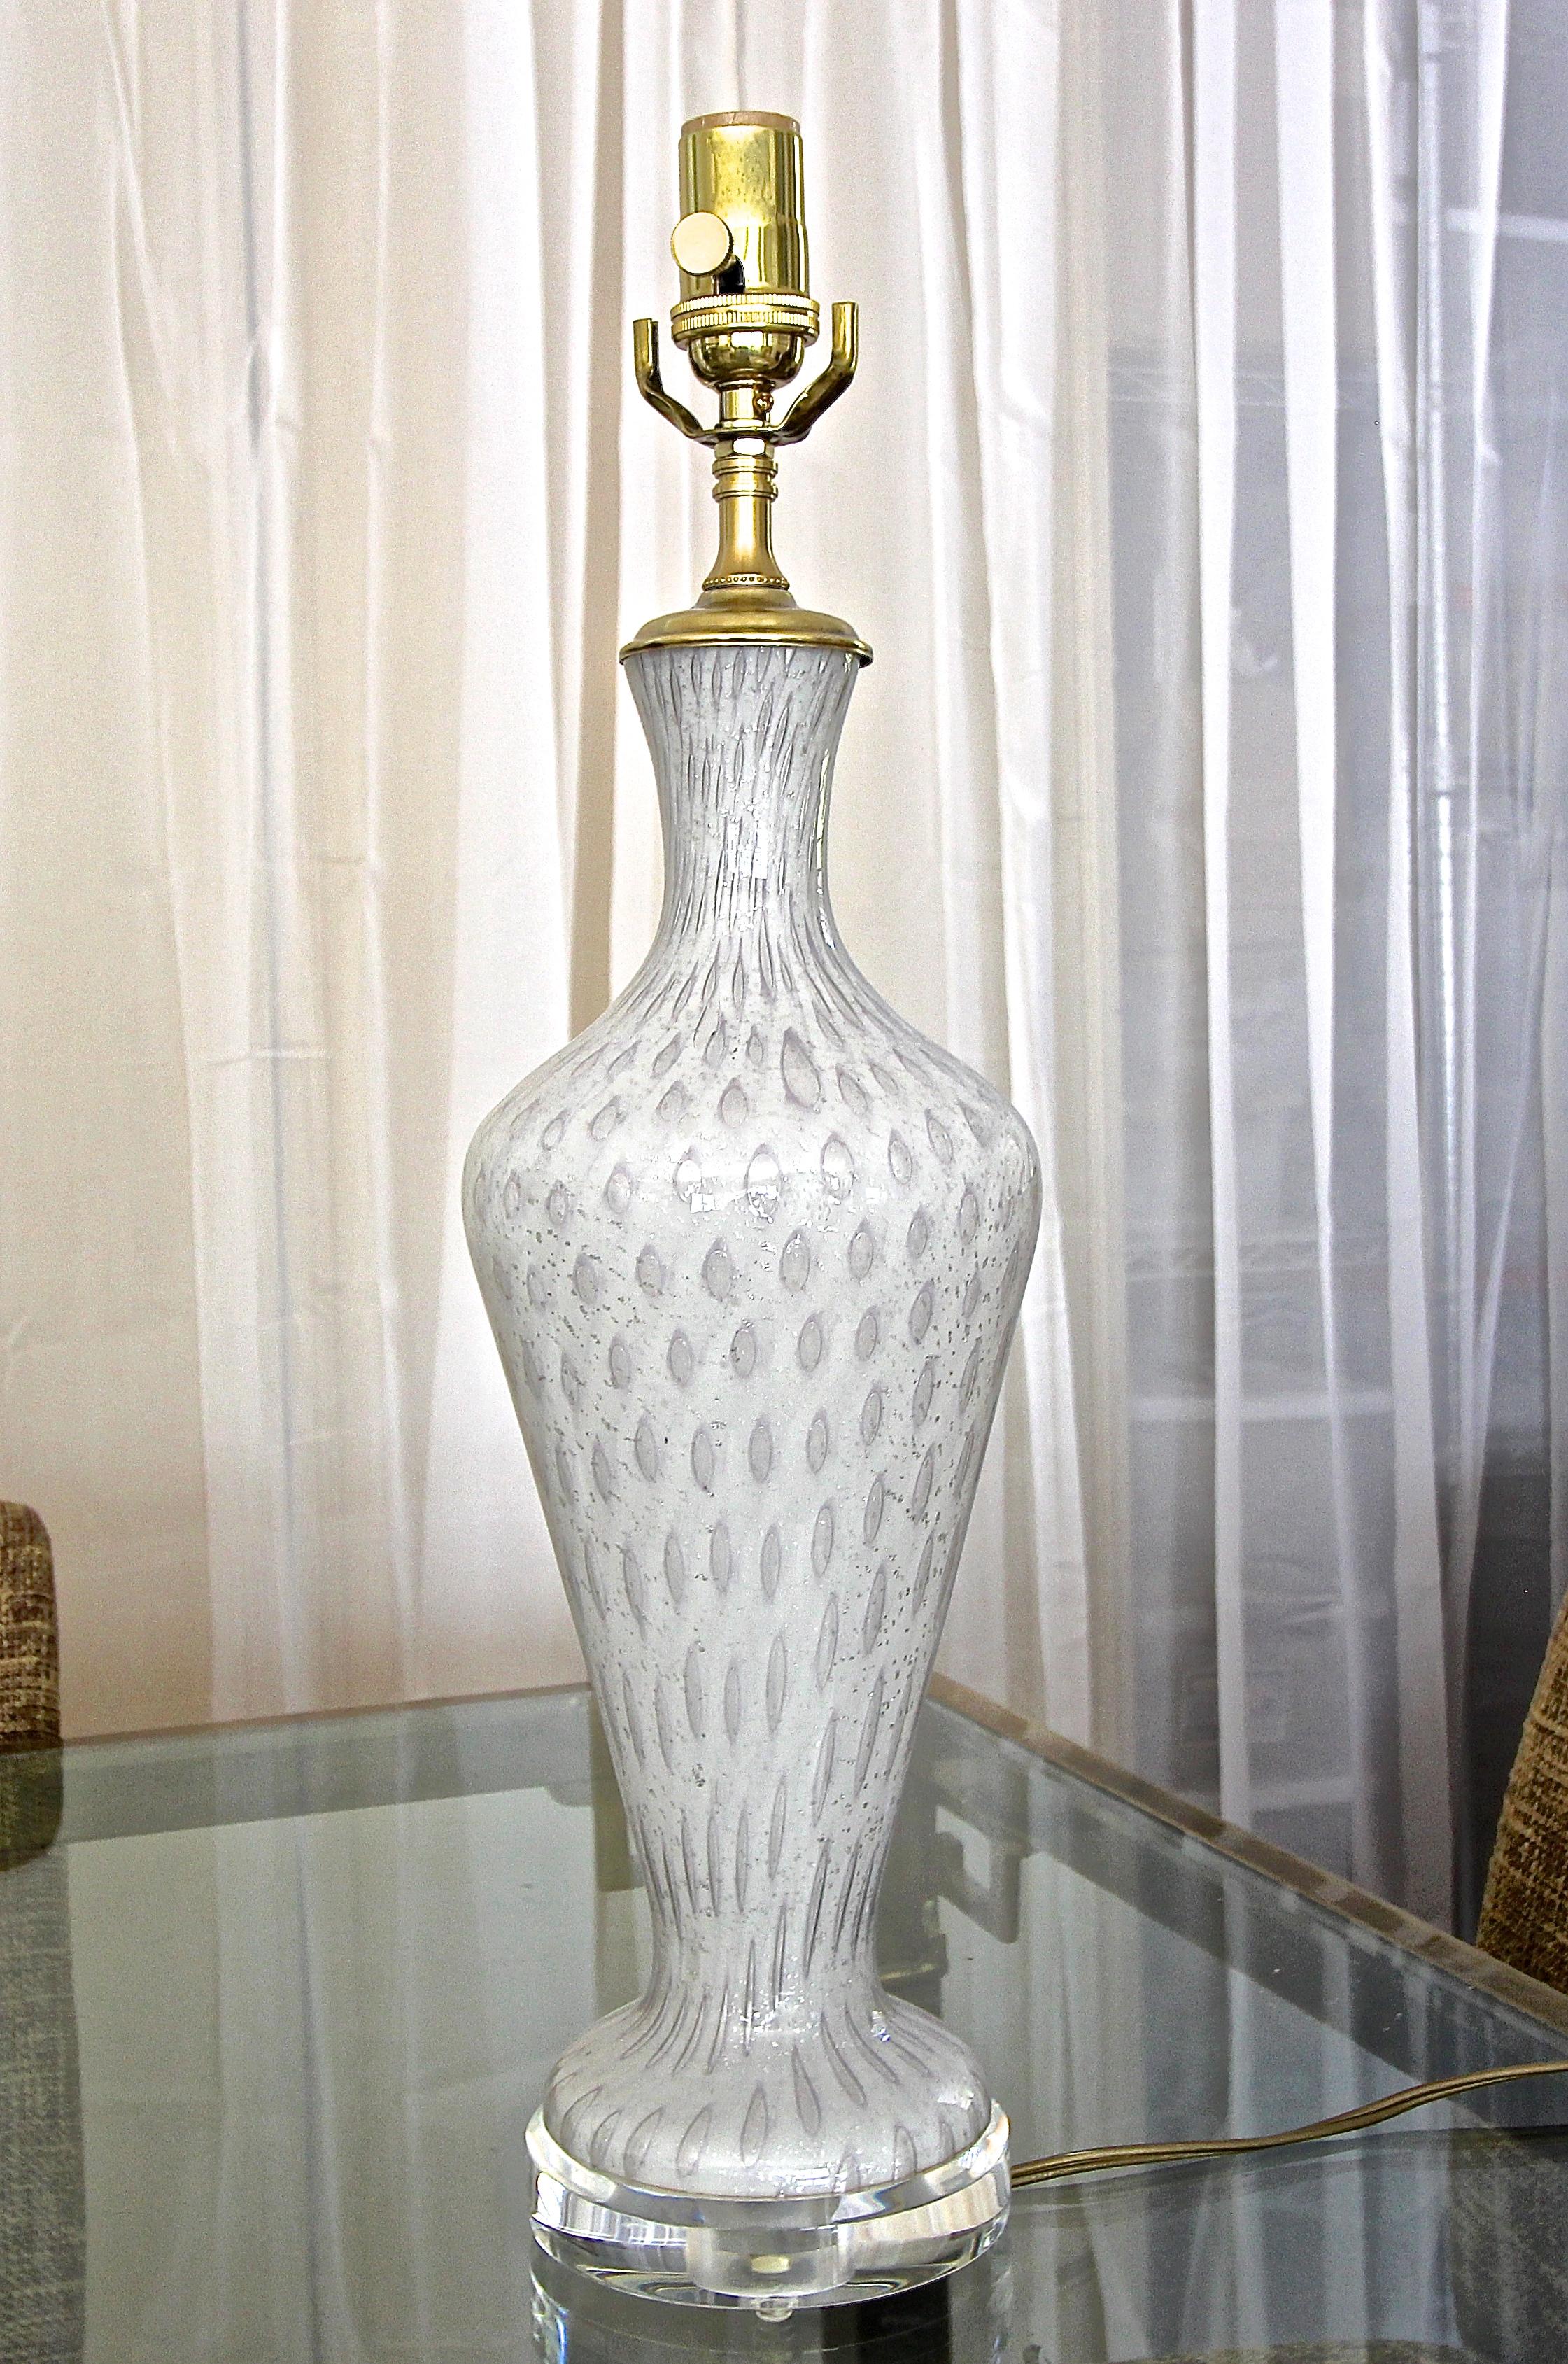 Murano Italian hand blown white glass table lamp, with silver mica flecks throughout and grey tone controlled bubbles on custom acrylic base. Rewired with new three way socket and cord.
Measures: Height top of glass 16.5